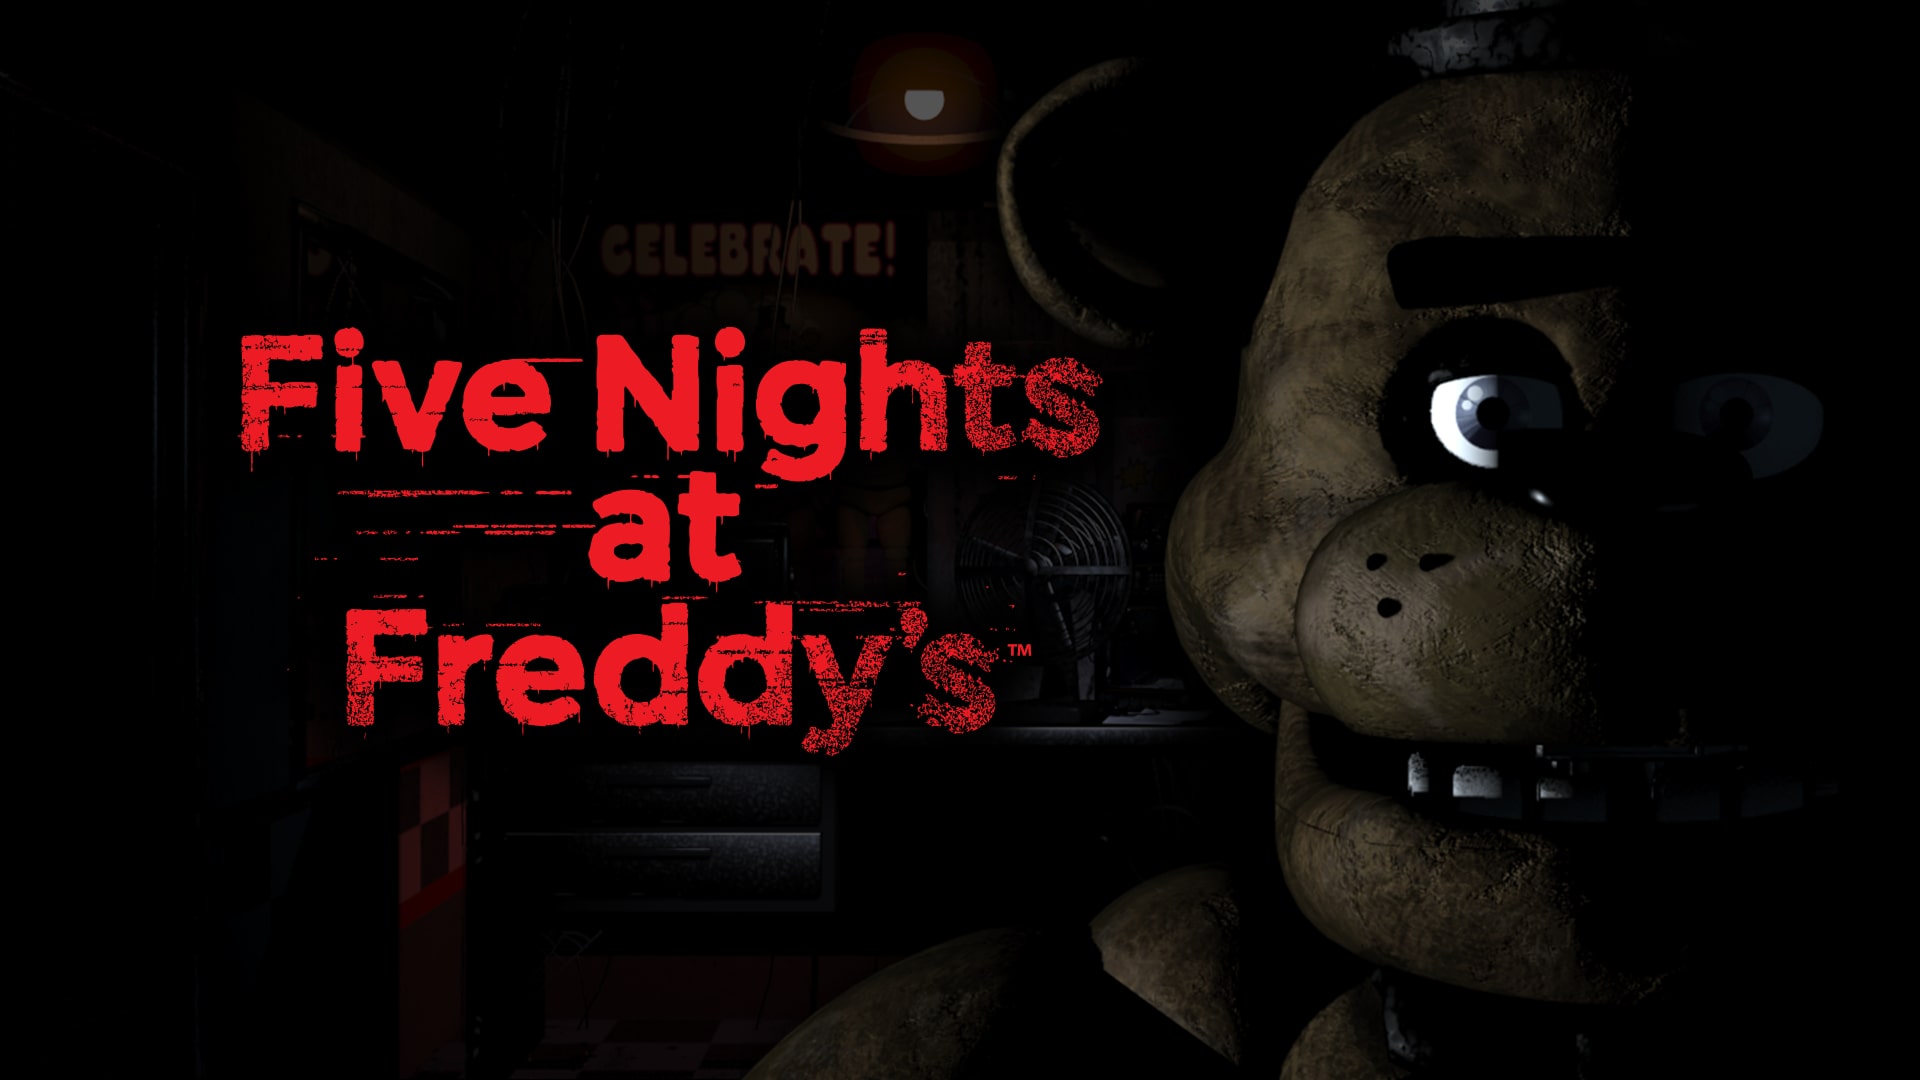 Five Nights At Freddy's is… 